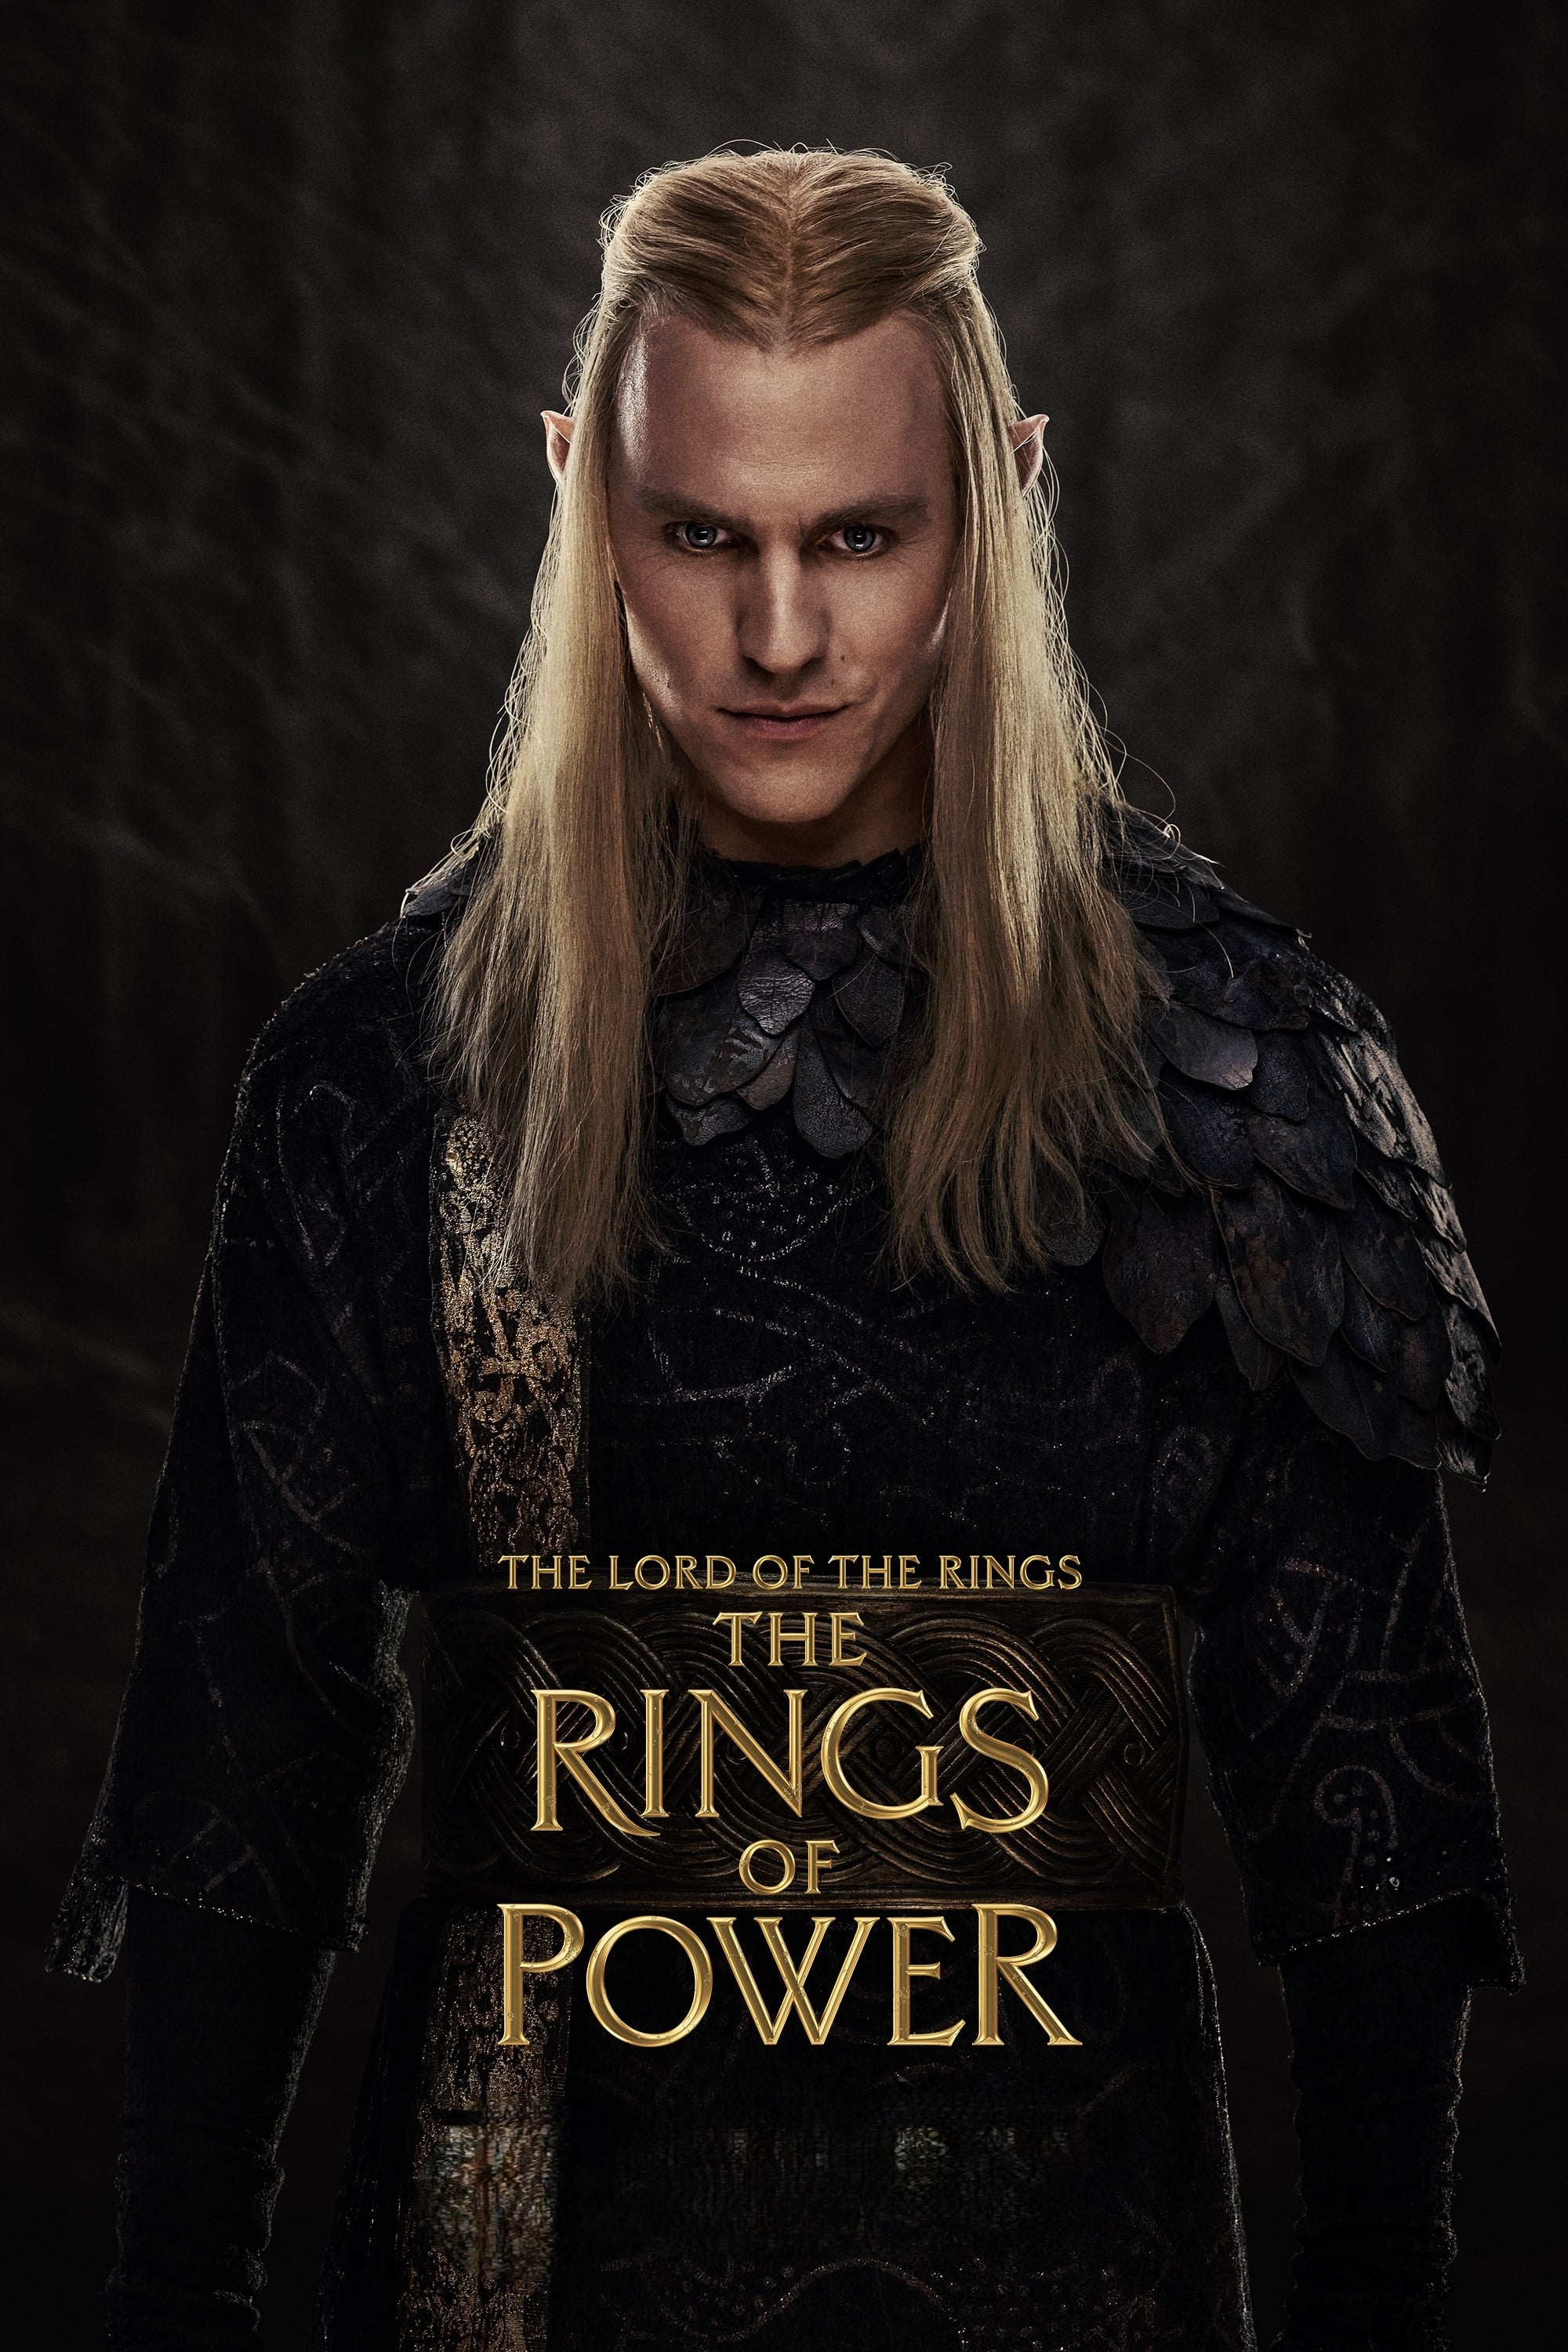 The Lord of the Rings: The Rings of Power Season 2